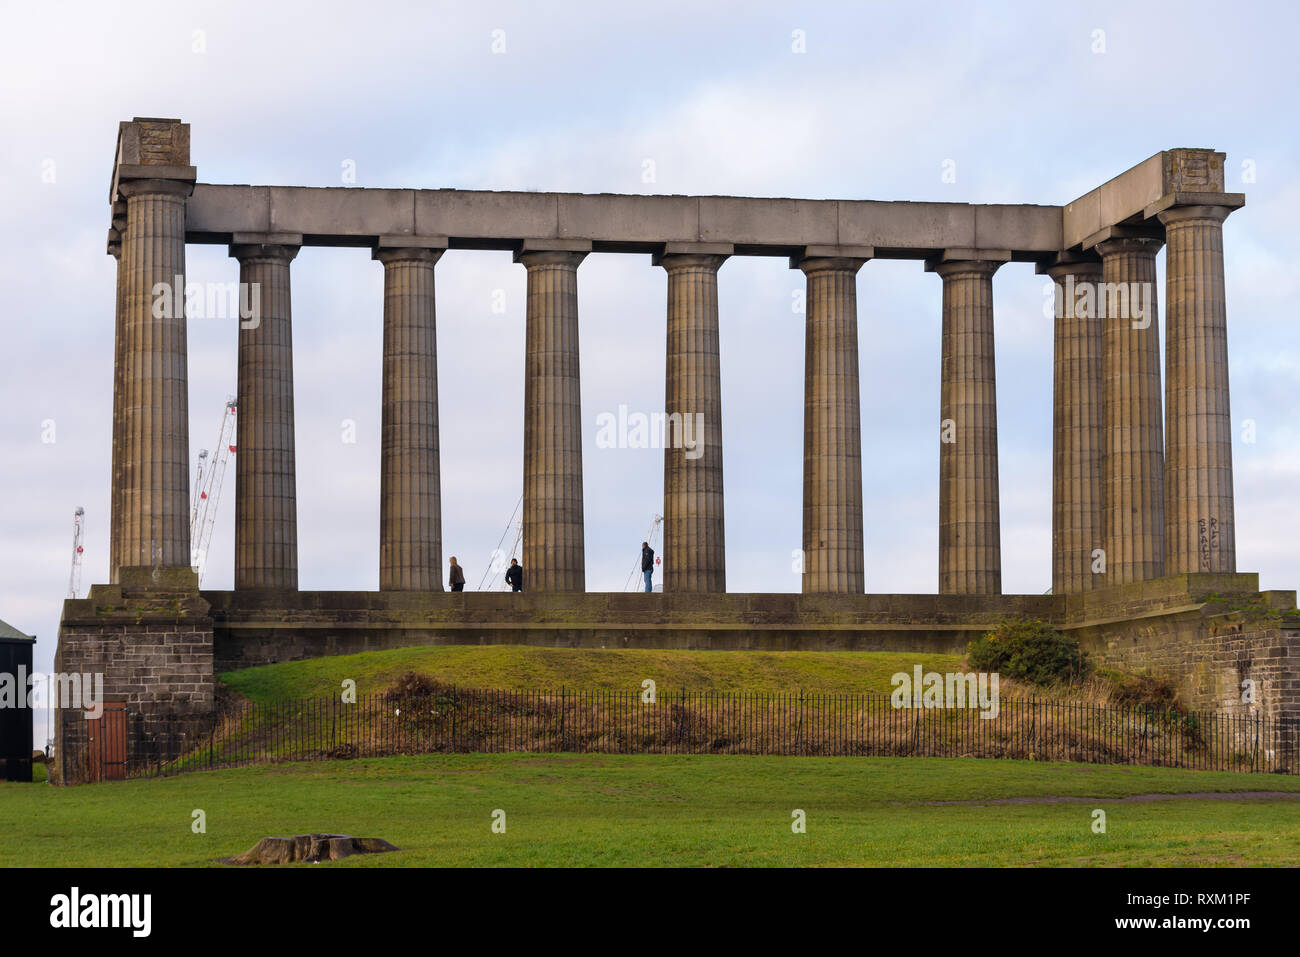 View of the National Monument of Scotland, Historical hilltop memorial to soldiers and sailors from Scotland who perished in the Napoleonic Wars. Stock Photo